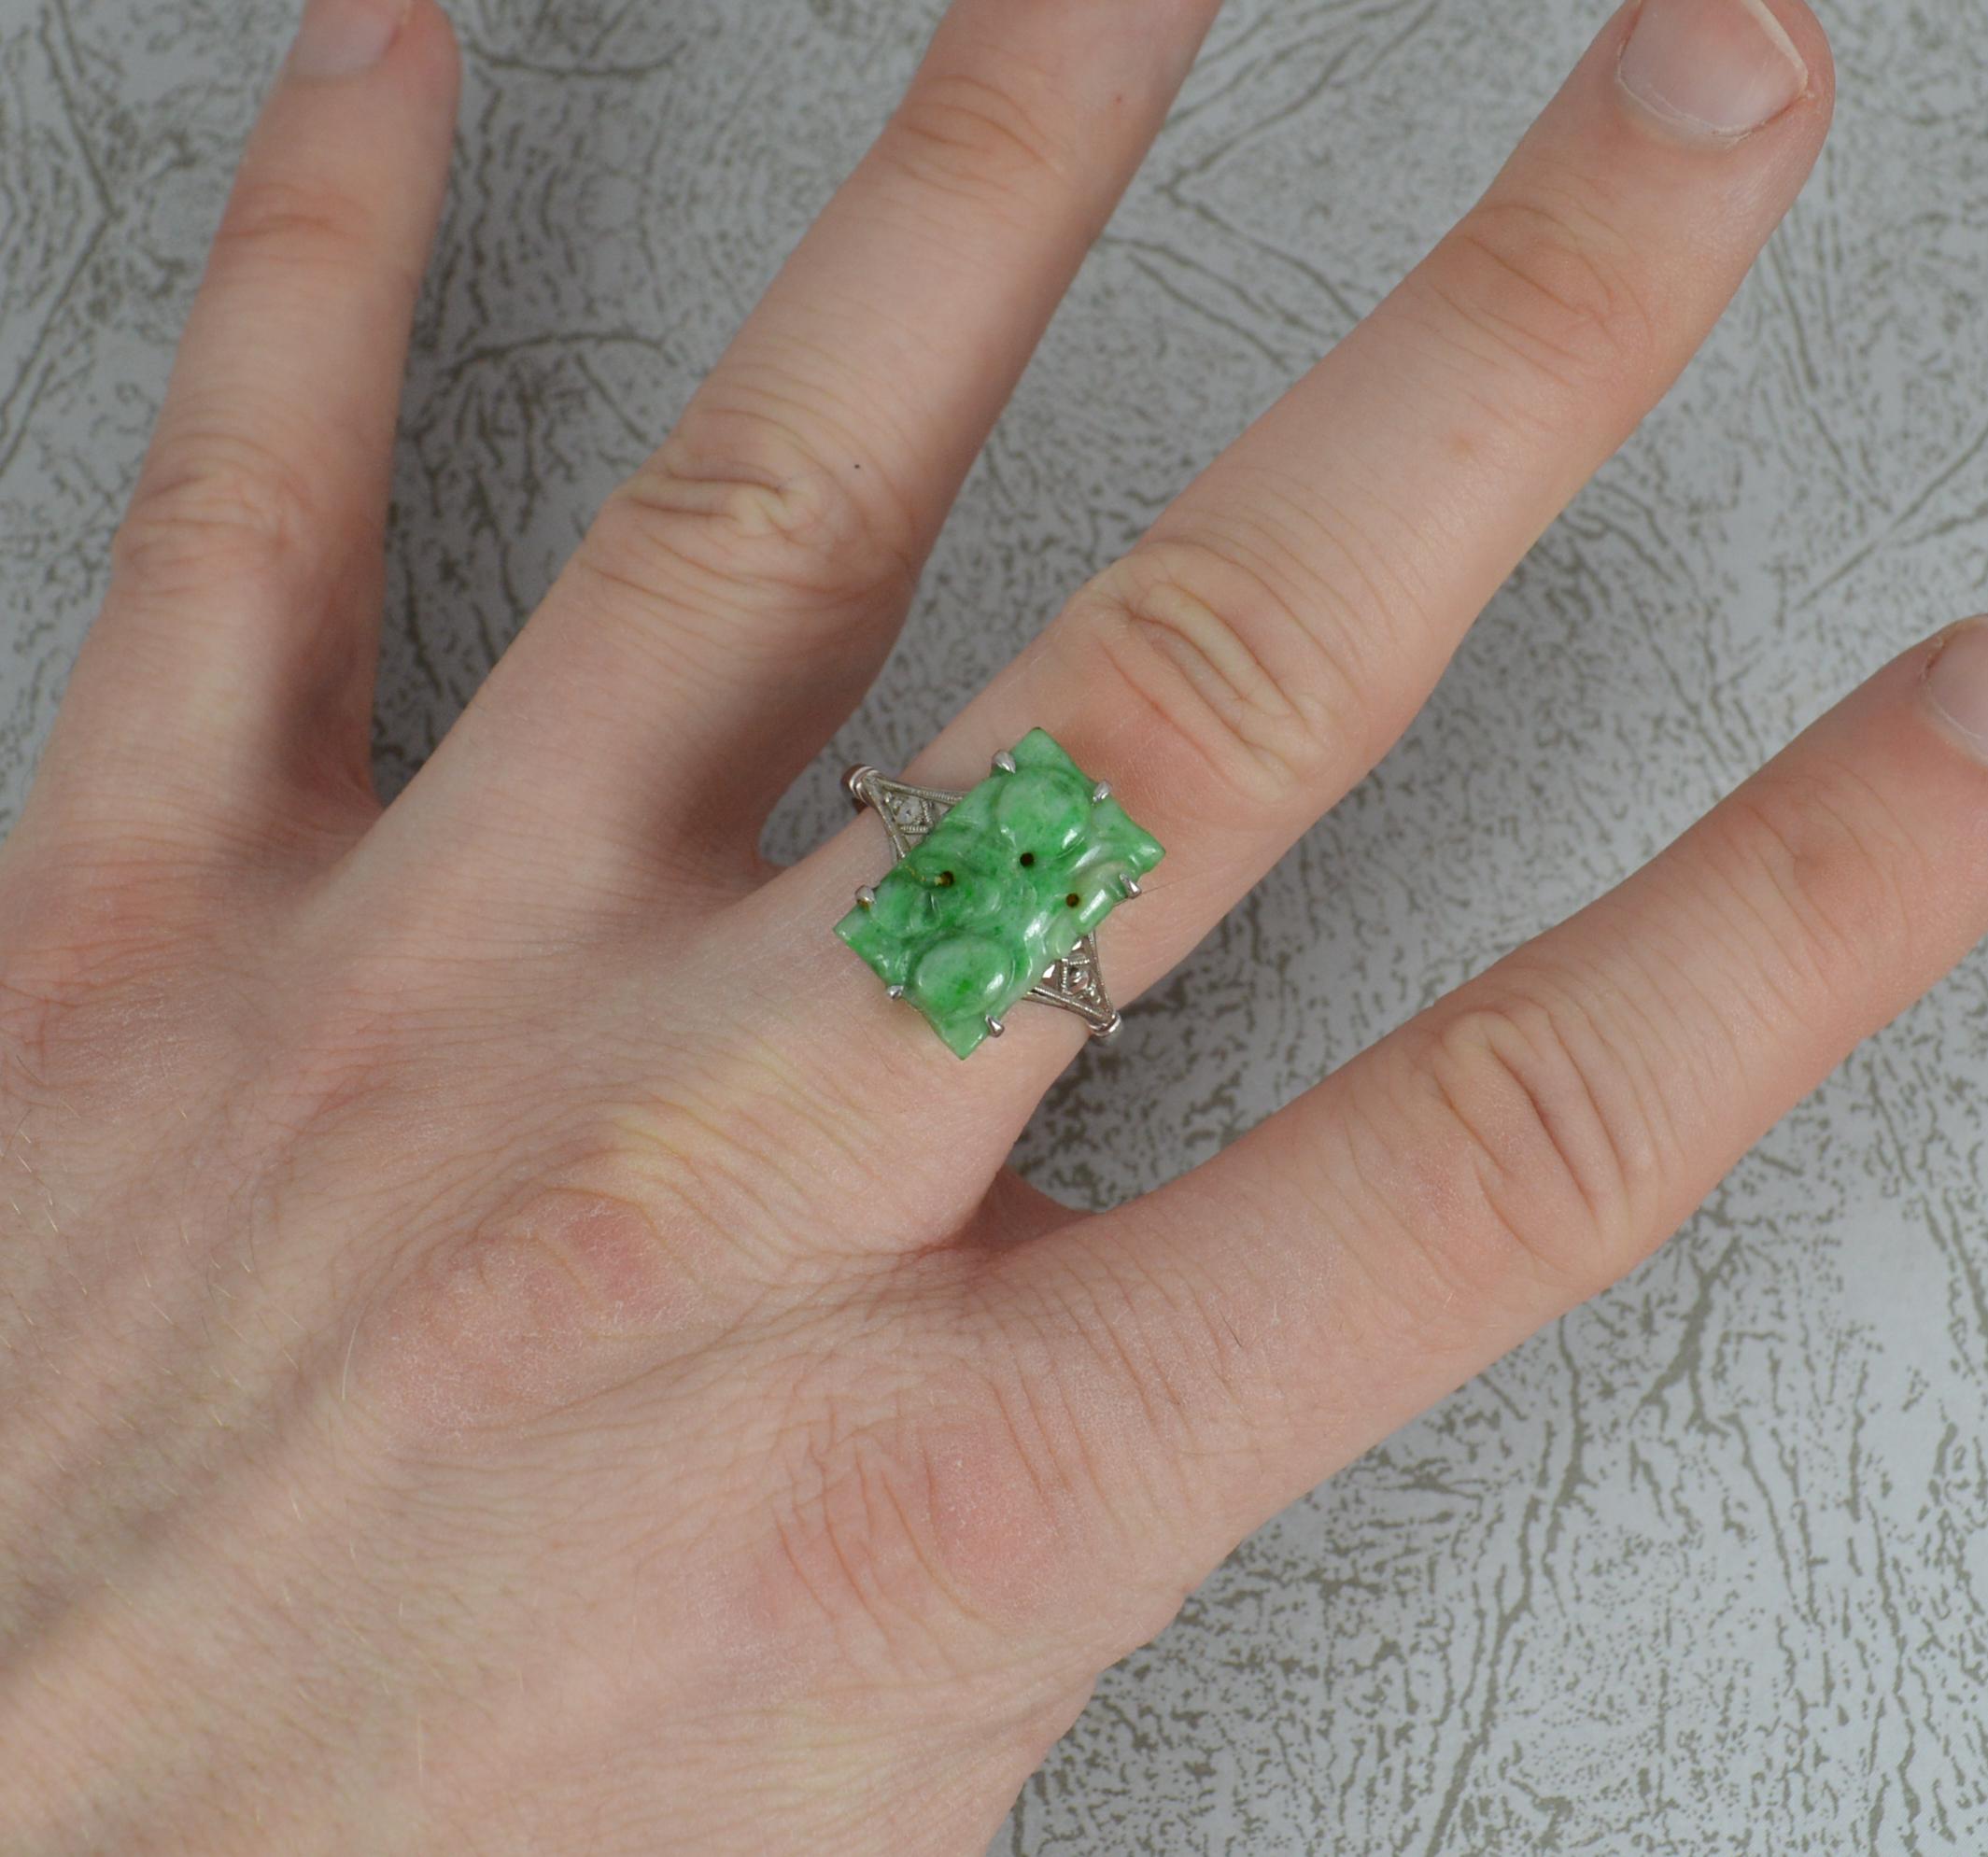 A superb Jade panel ring circa 1930.
Solid 9 carat white gold shank and setting.
9.8mm x 15.4mm jade panel approx.

CONDITION ; Excellent. Well set stone. Strong and clean band. Crisp design throughout. Issue free. Please view photographs.

WEIGHT ;